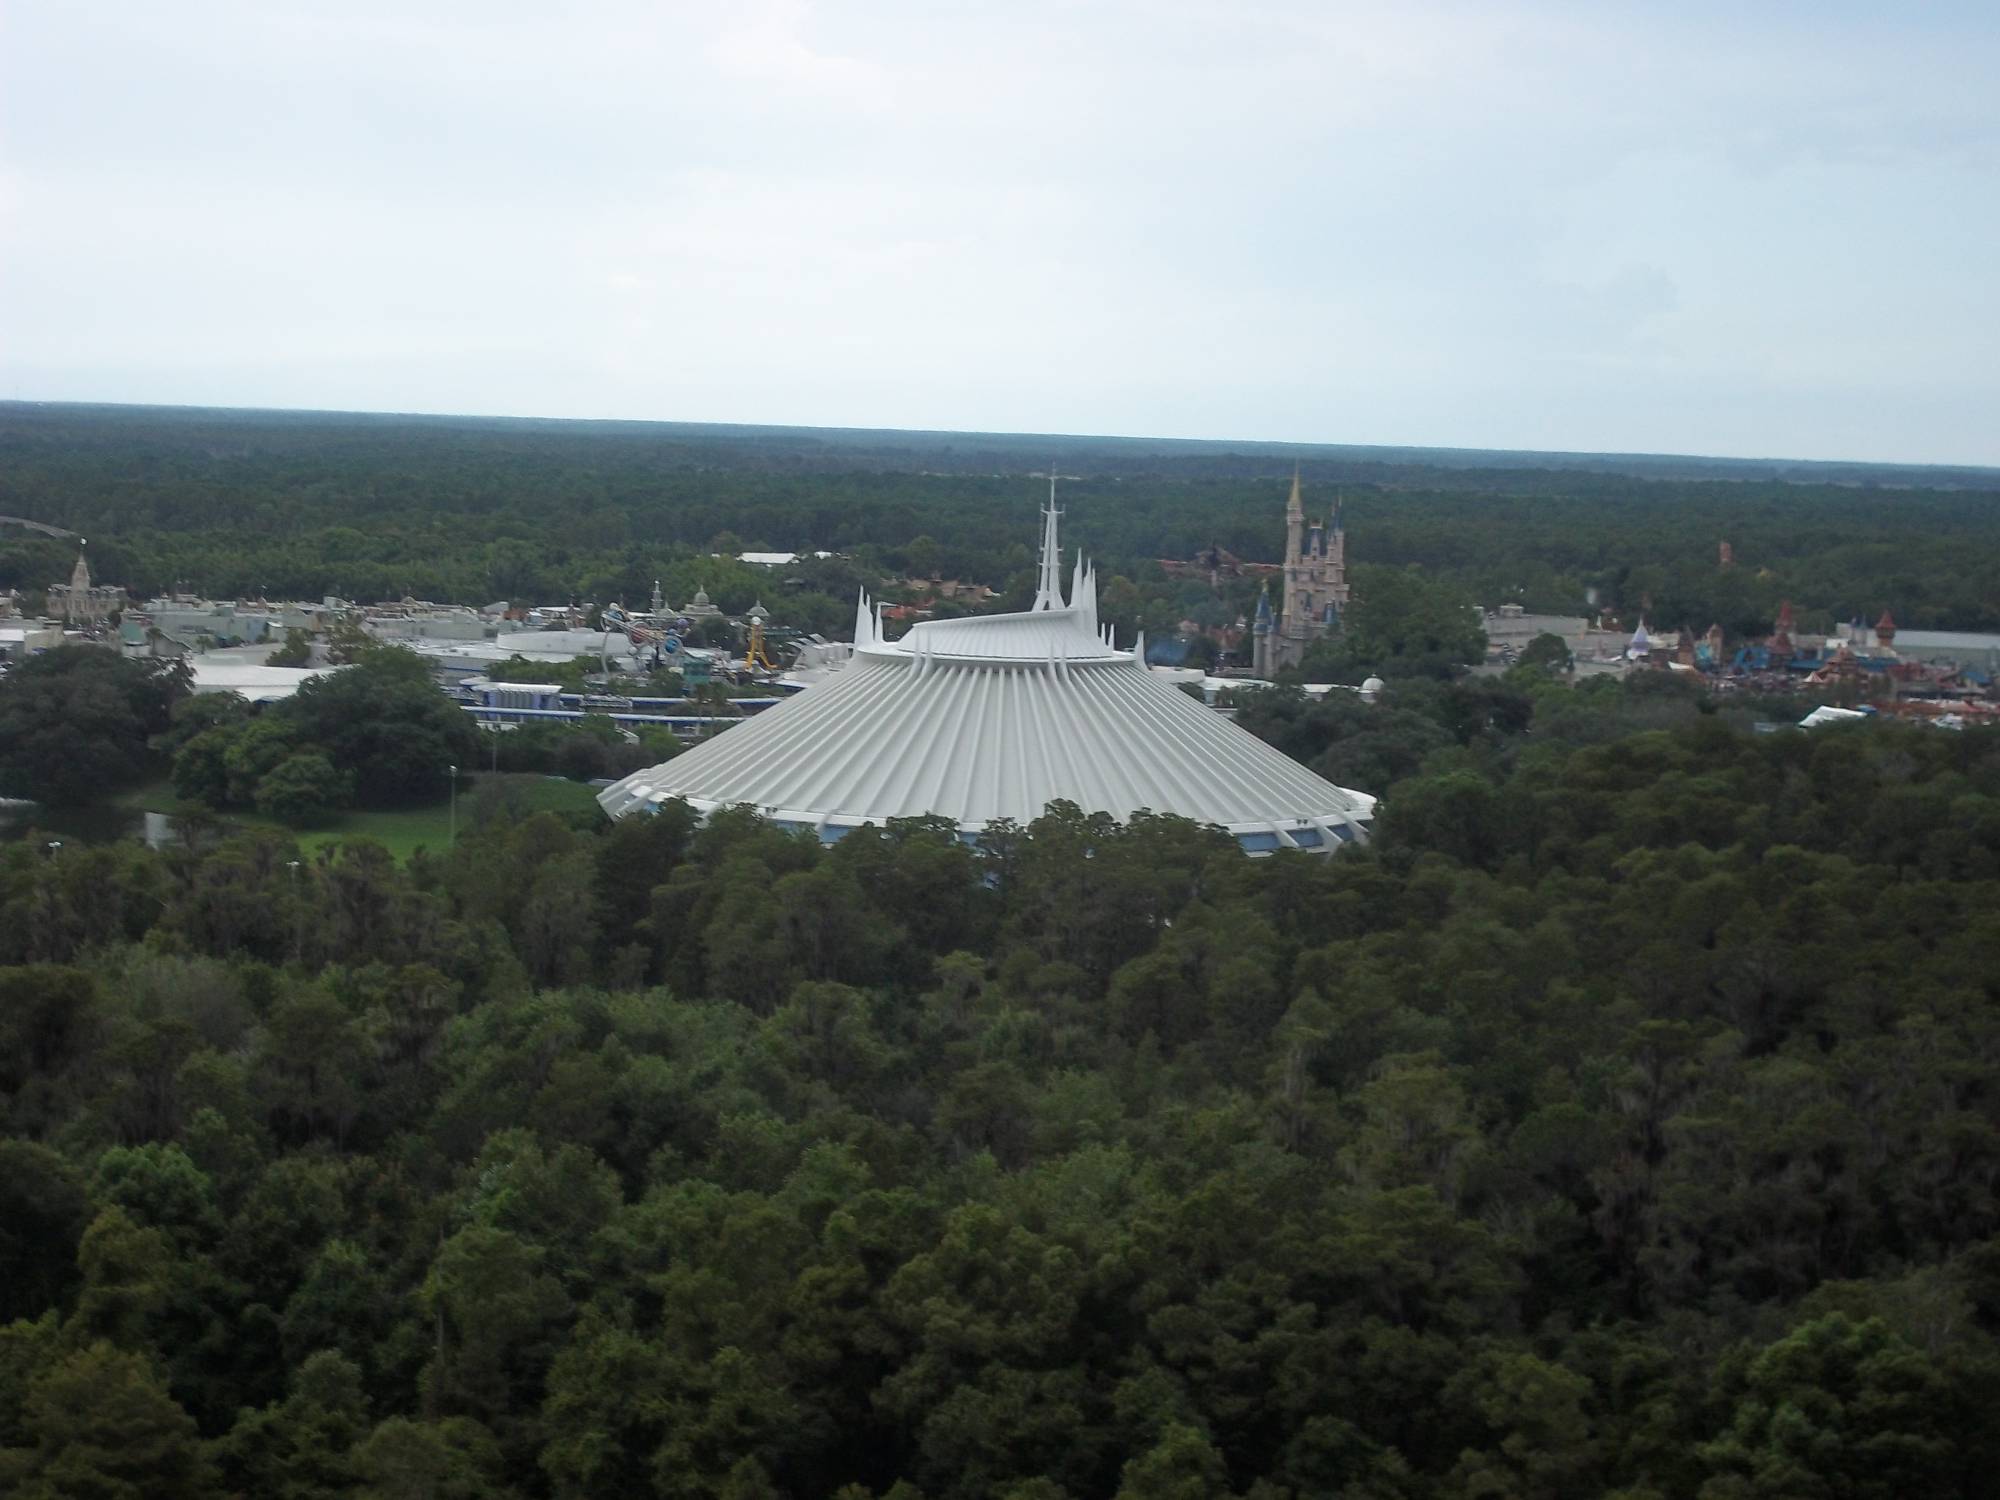 View of Magic Kingdom (from a distance)